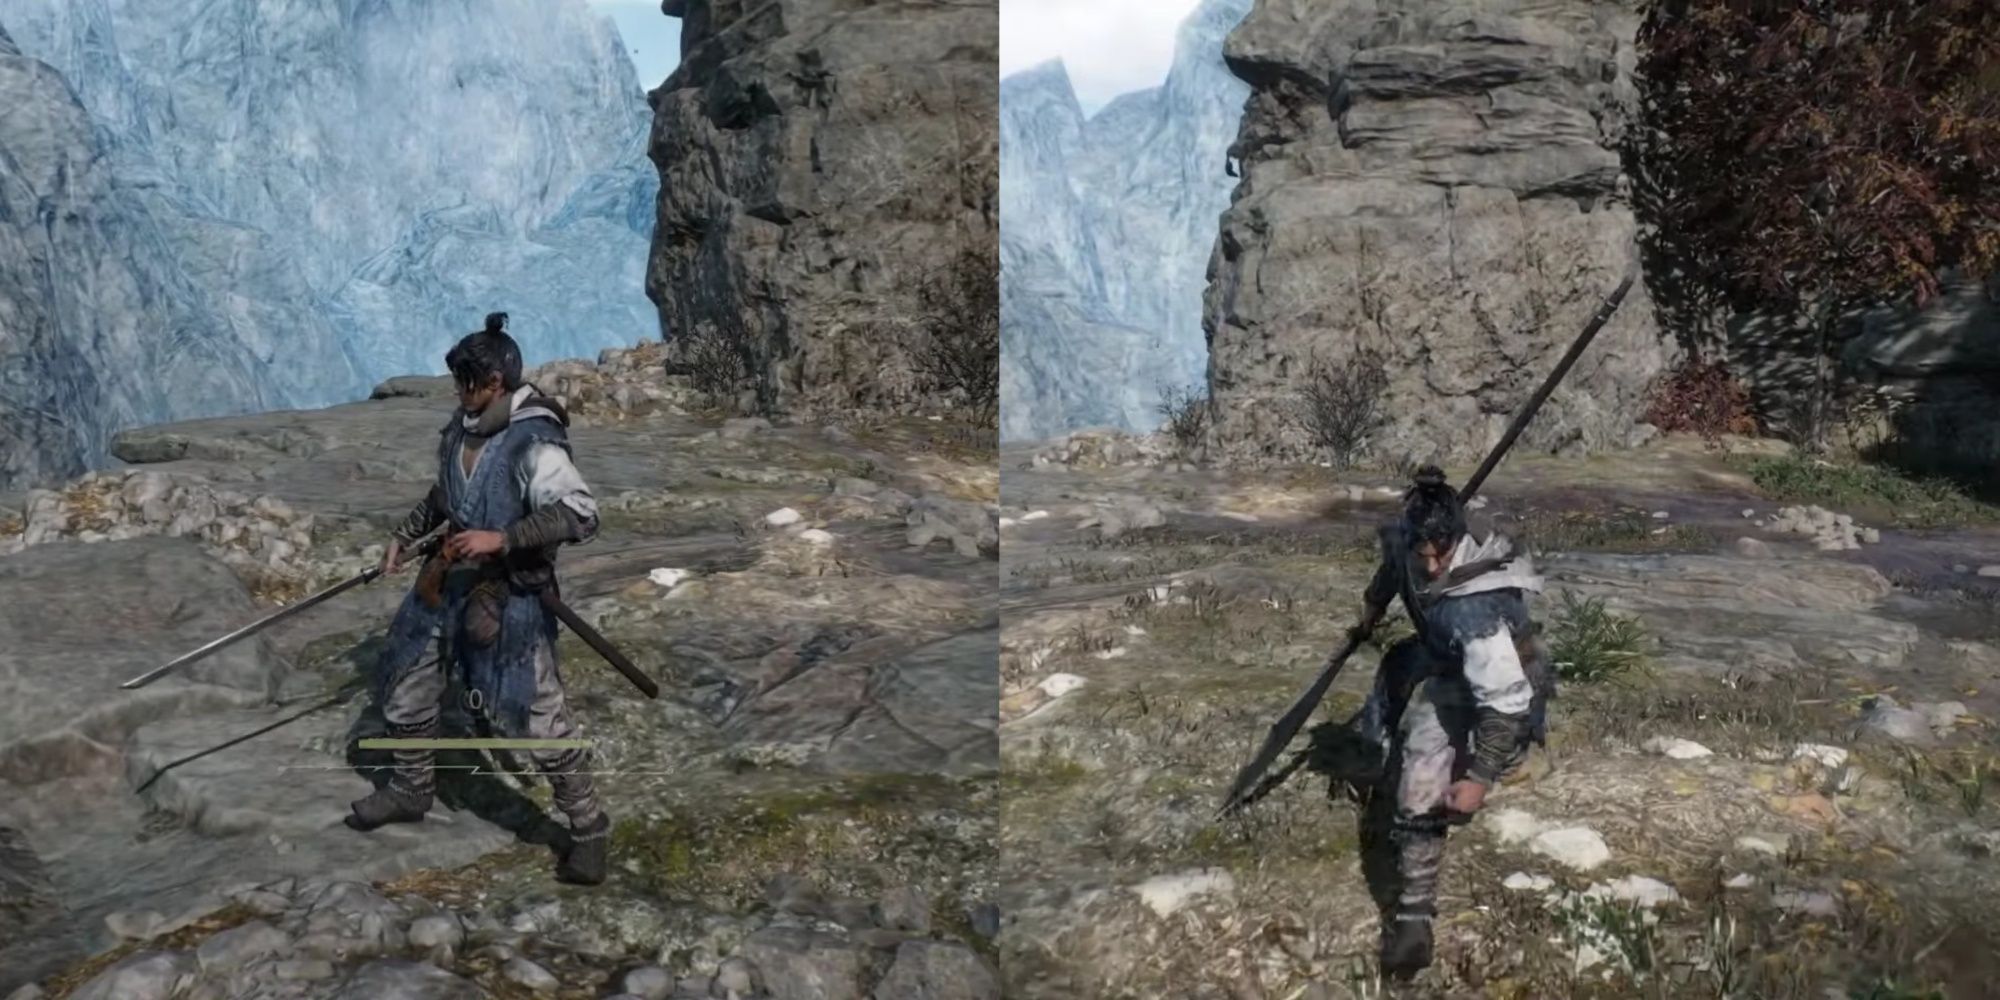 Wo Long Fallen Dynasty screenshots of the main character wielding a straight saber (left) and glaive (right).